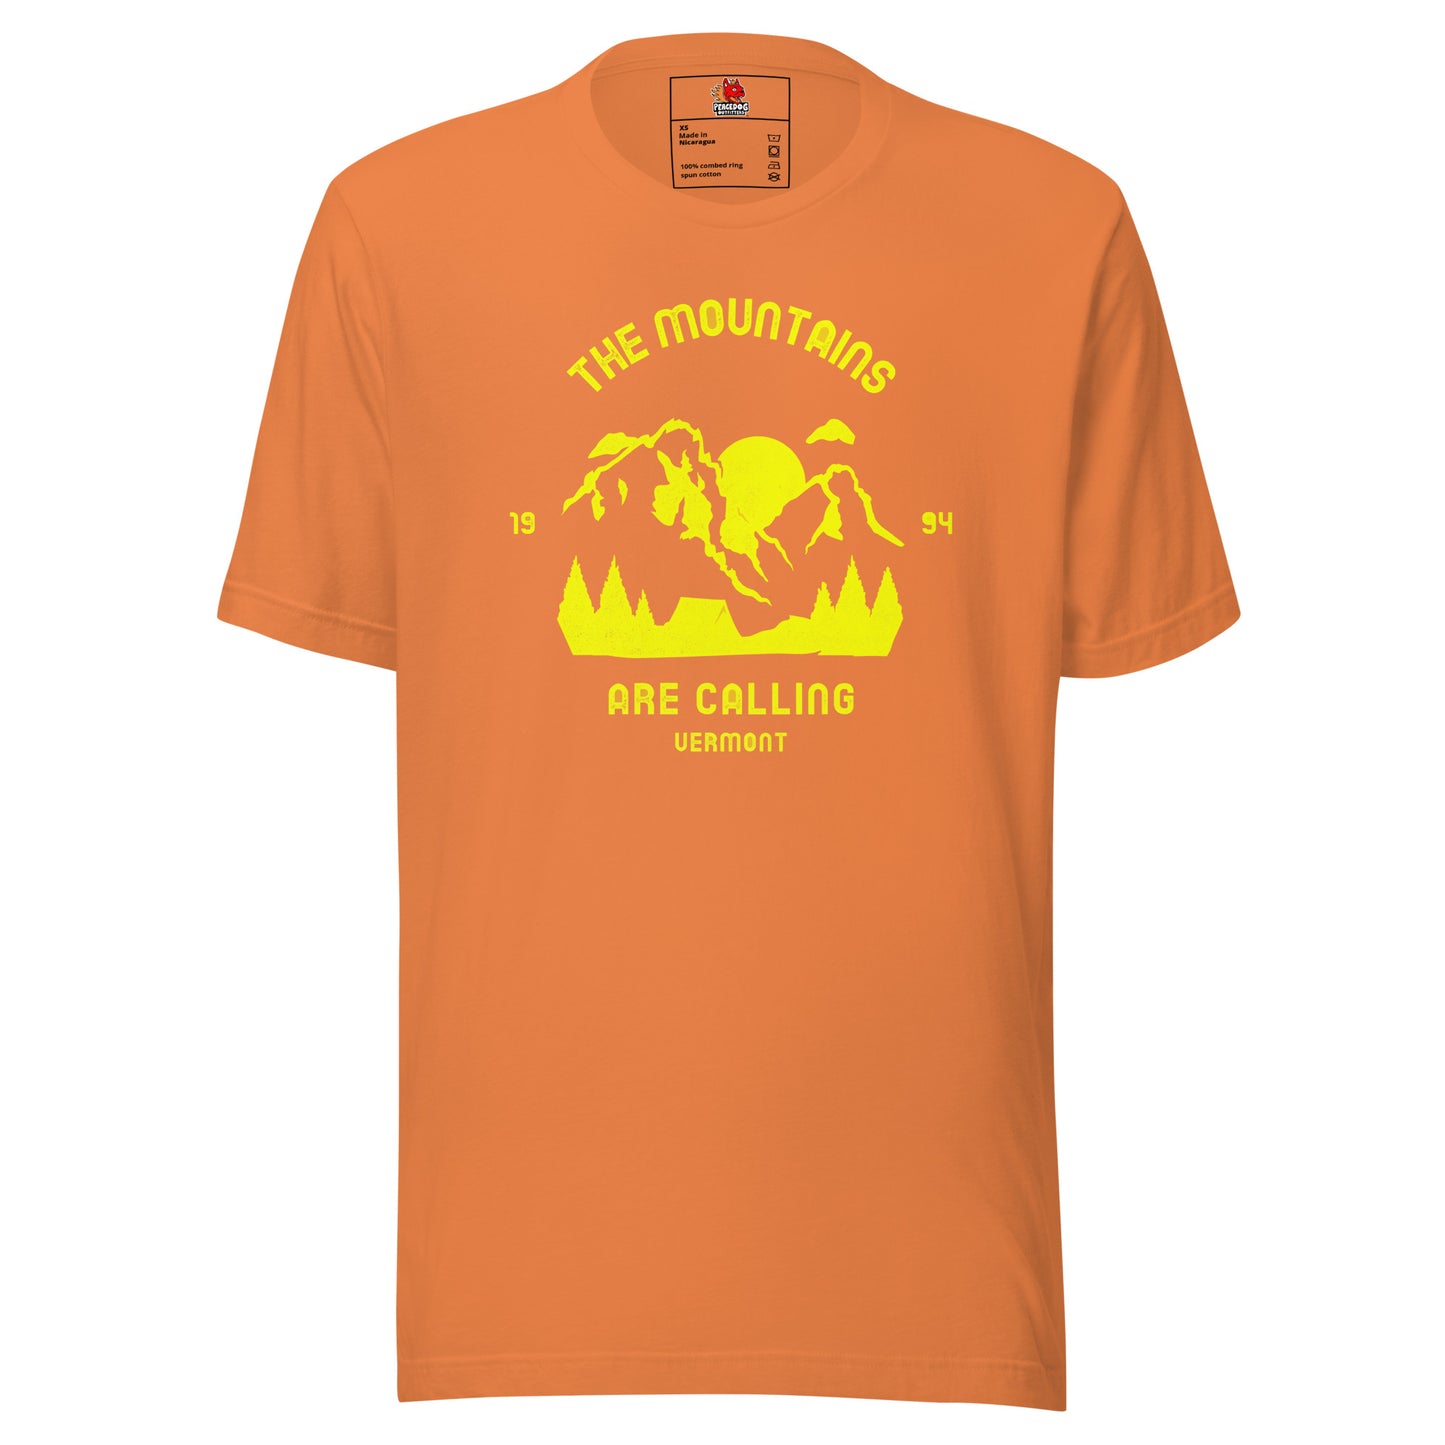 The Mountains are Calling - VERMONT T-shirt